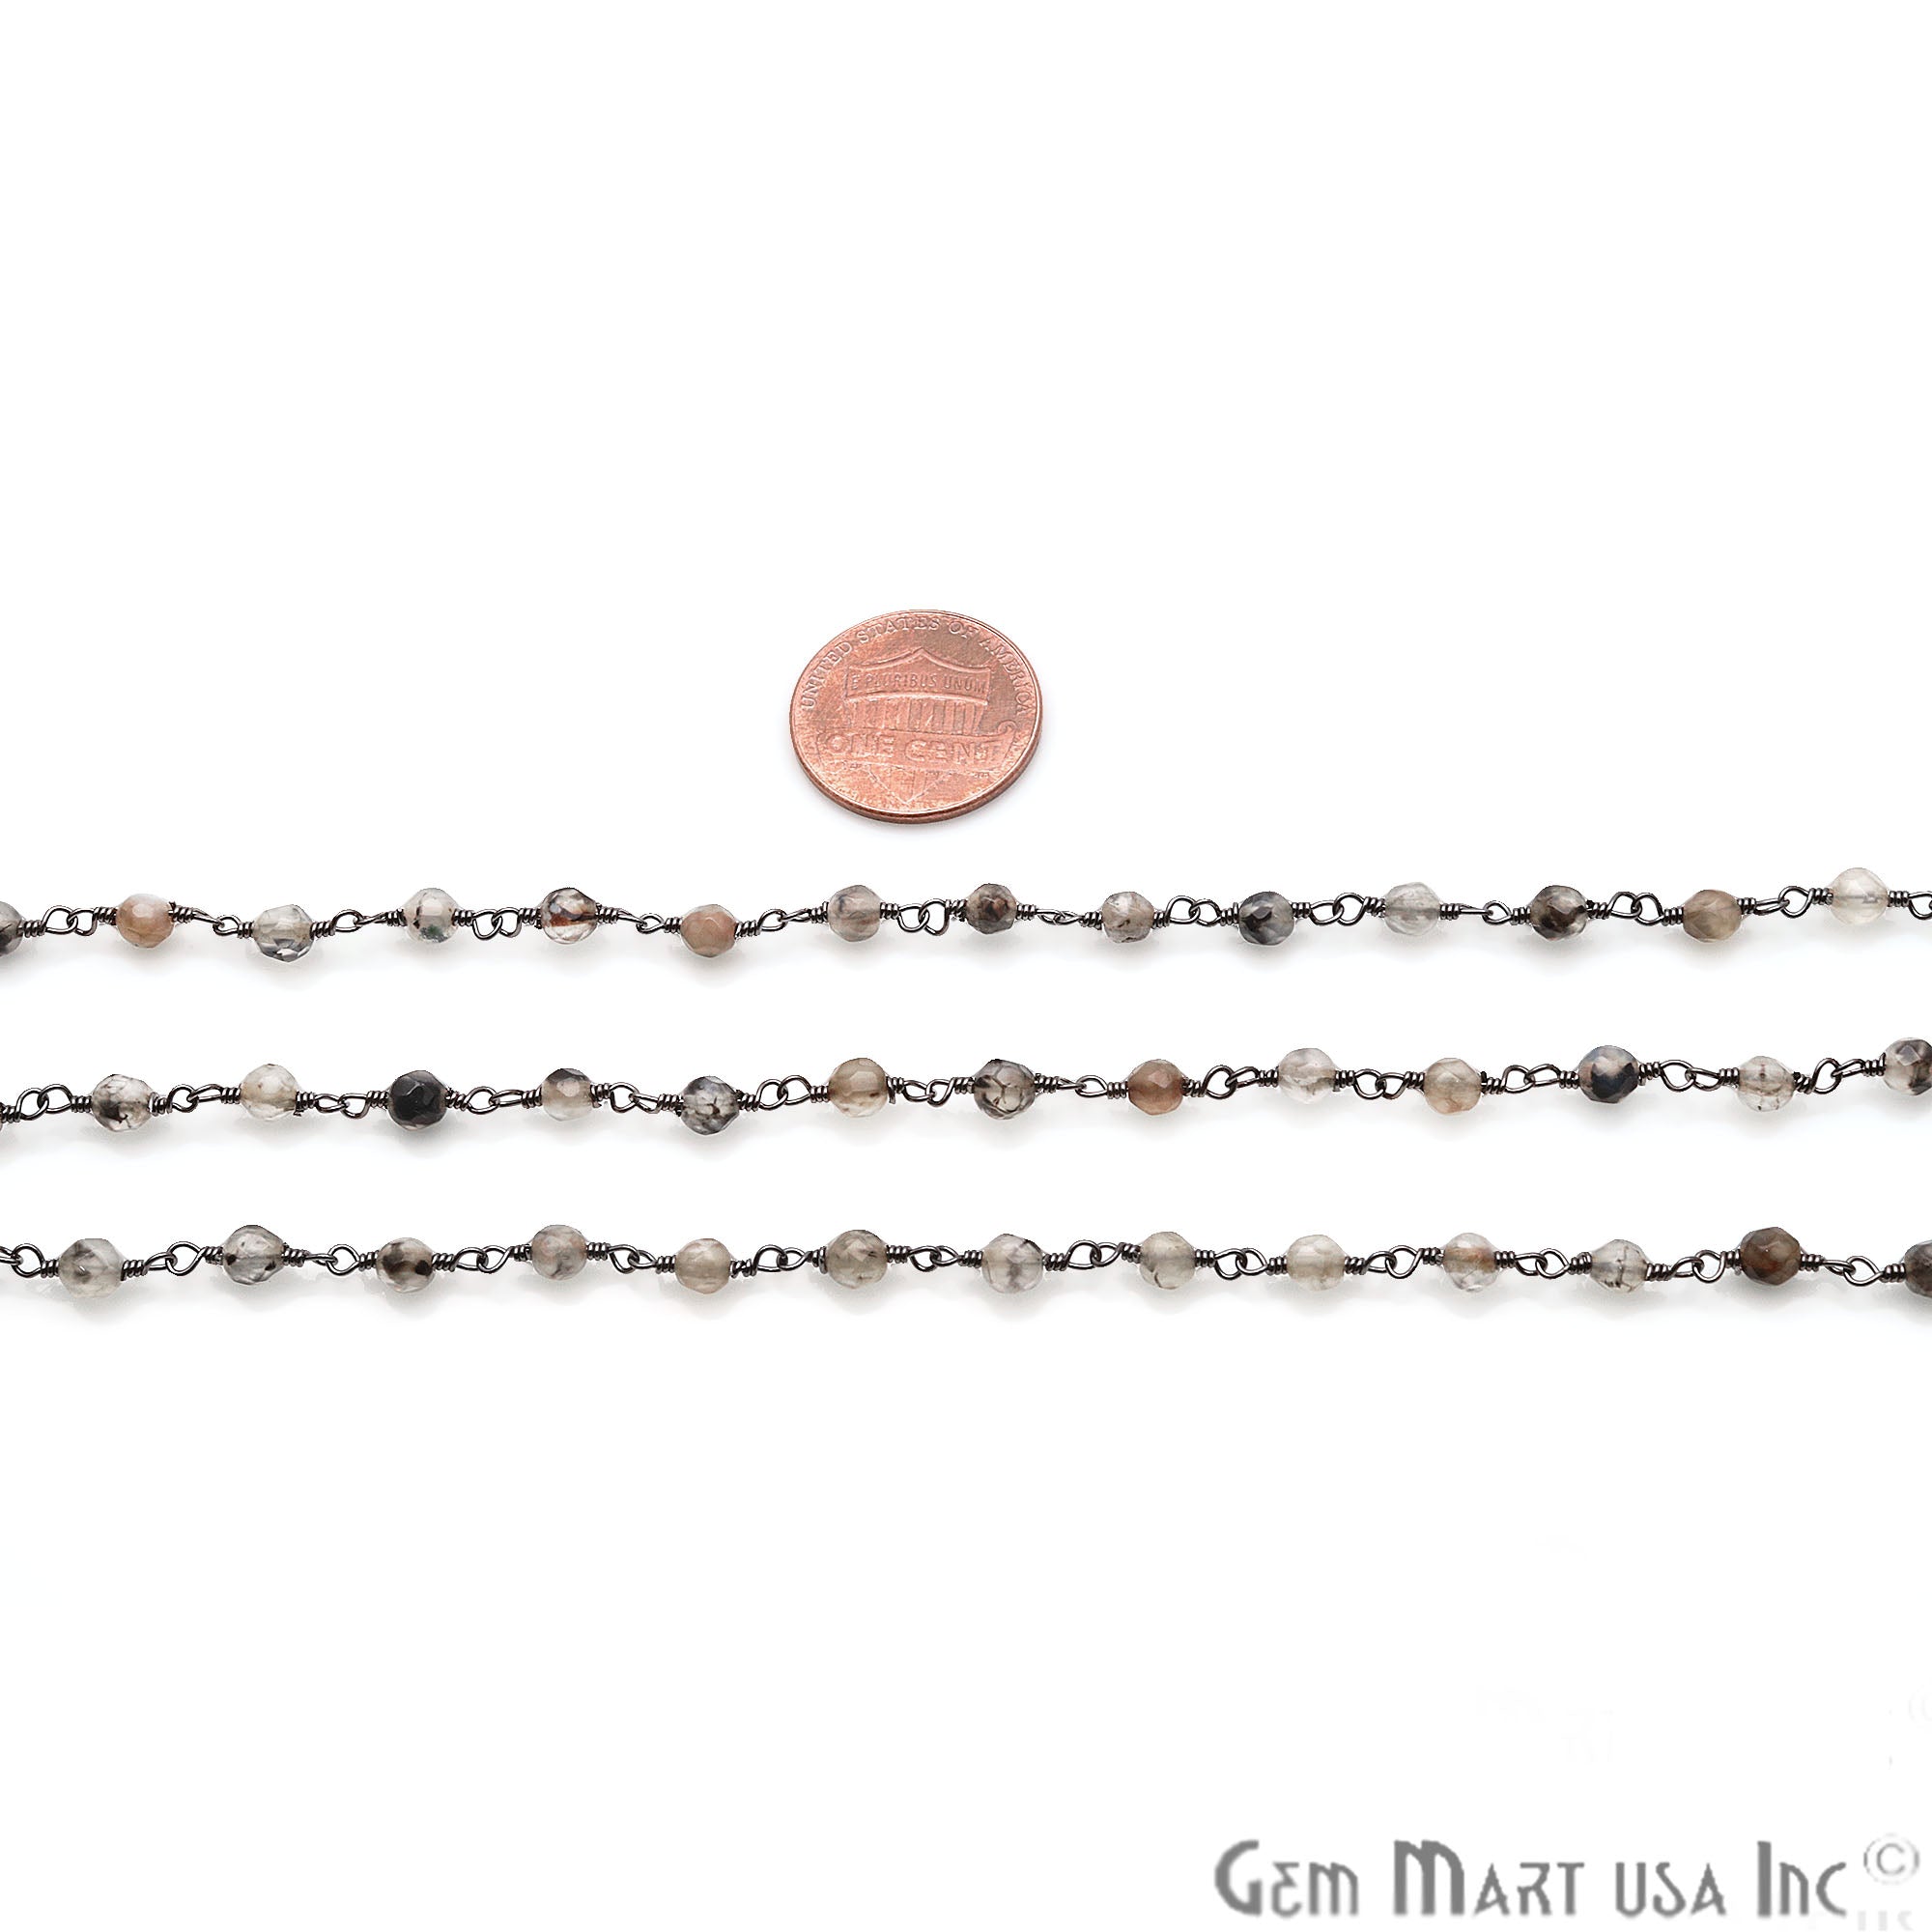 Brown Rutile Jade Faceted Beads 4mm Oxidized Plated Wire Wrapped Rosary Chain - GemMartUSA